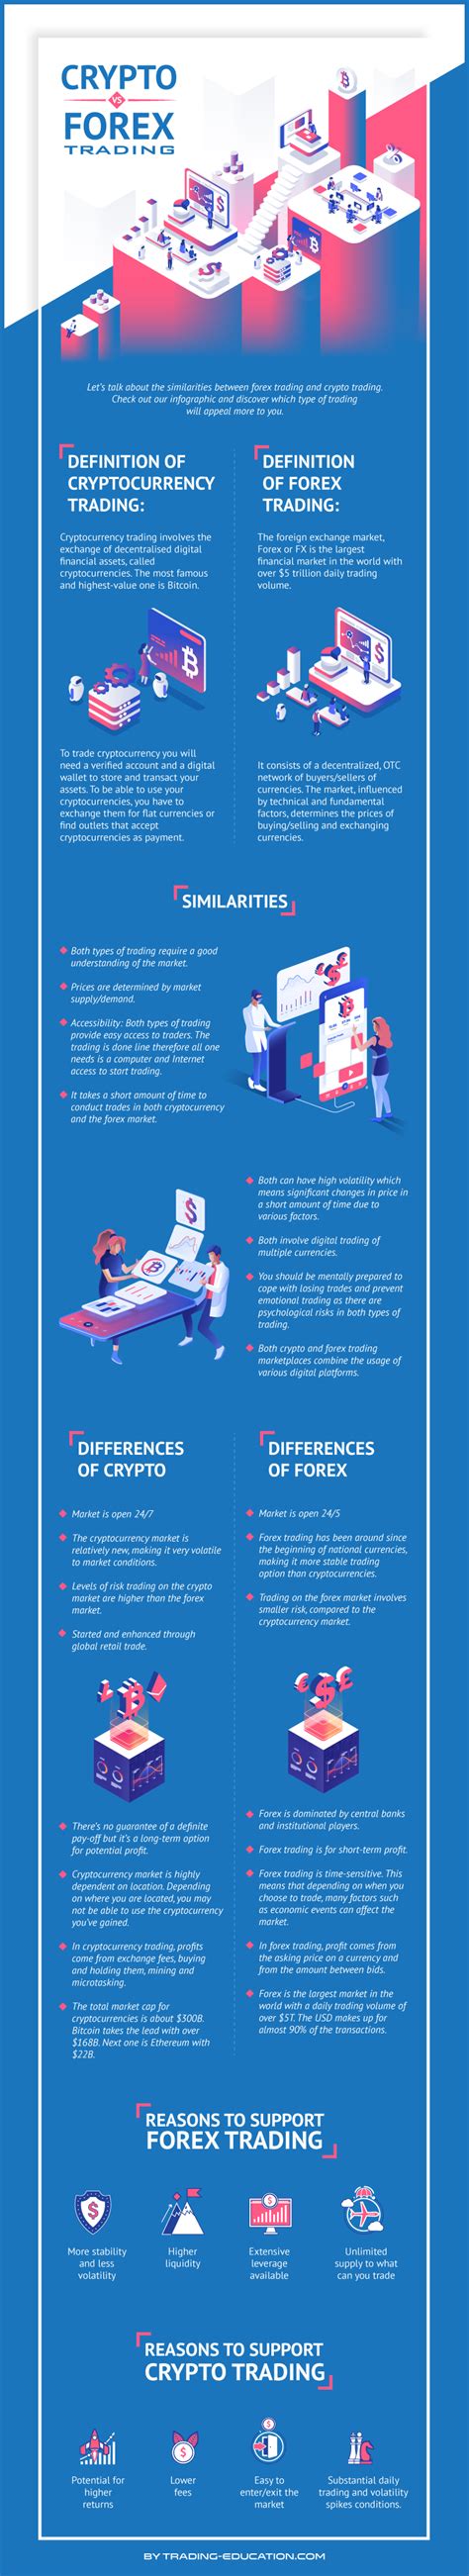 Traders have the opportunity to profit from often sharp price fluctuations in the market. Similarities and Differences Between Crypto and Forex ...